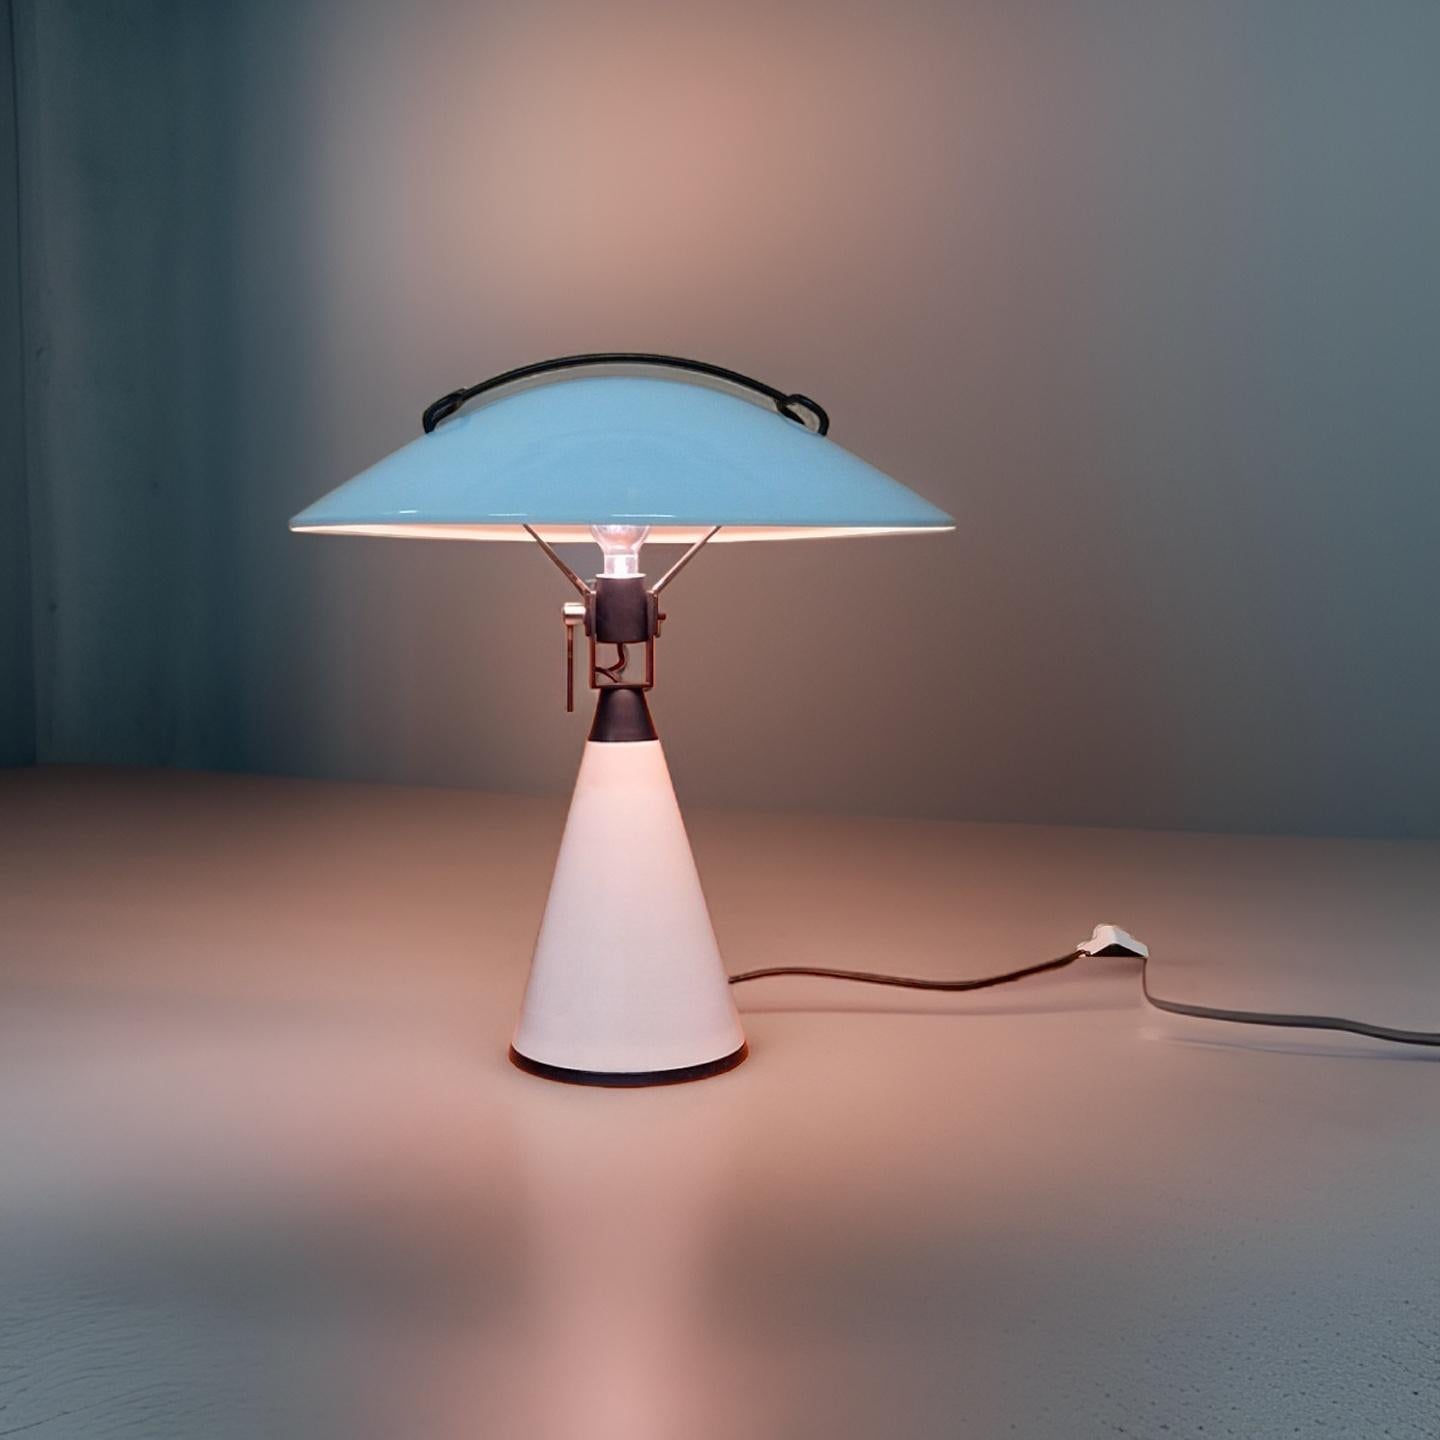 Impressive floor or table lamp. Designed by Elio Martinelli for Martinelli Luce in the 1970s. It is made from metal. The satellite dish shaped shade can rotate and pivot so it can reflect the light in different directions. 

Martinelli Luce was